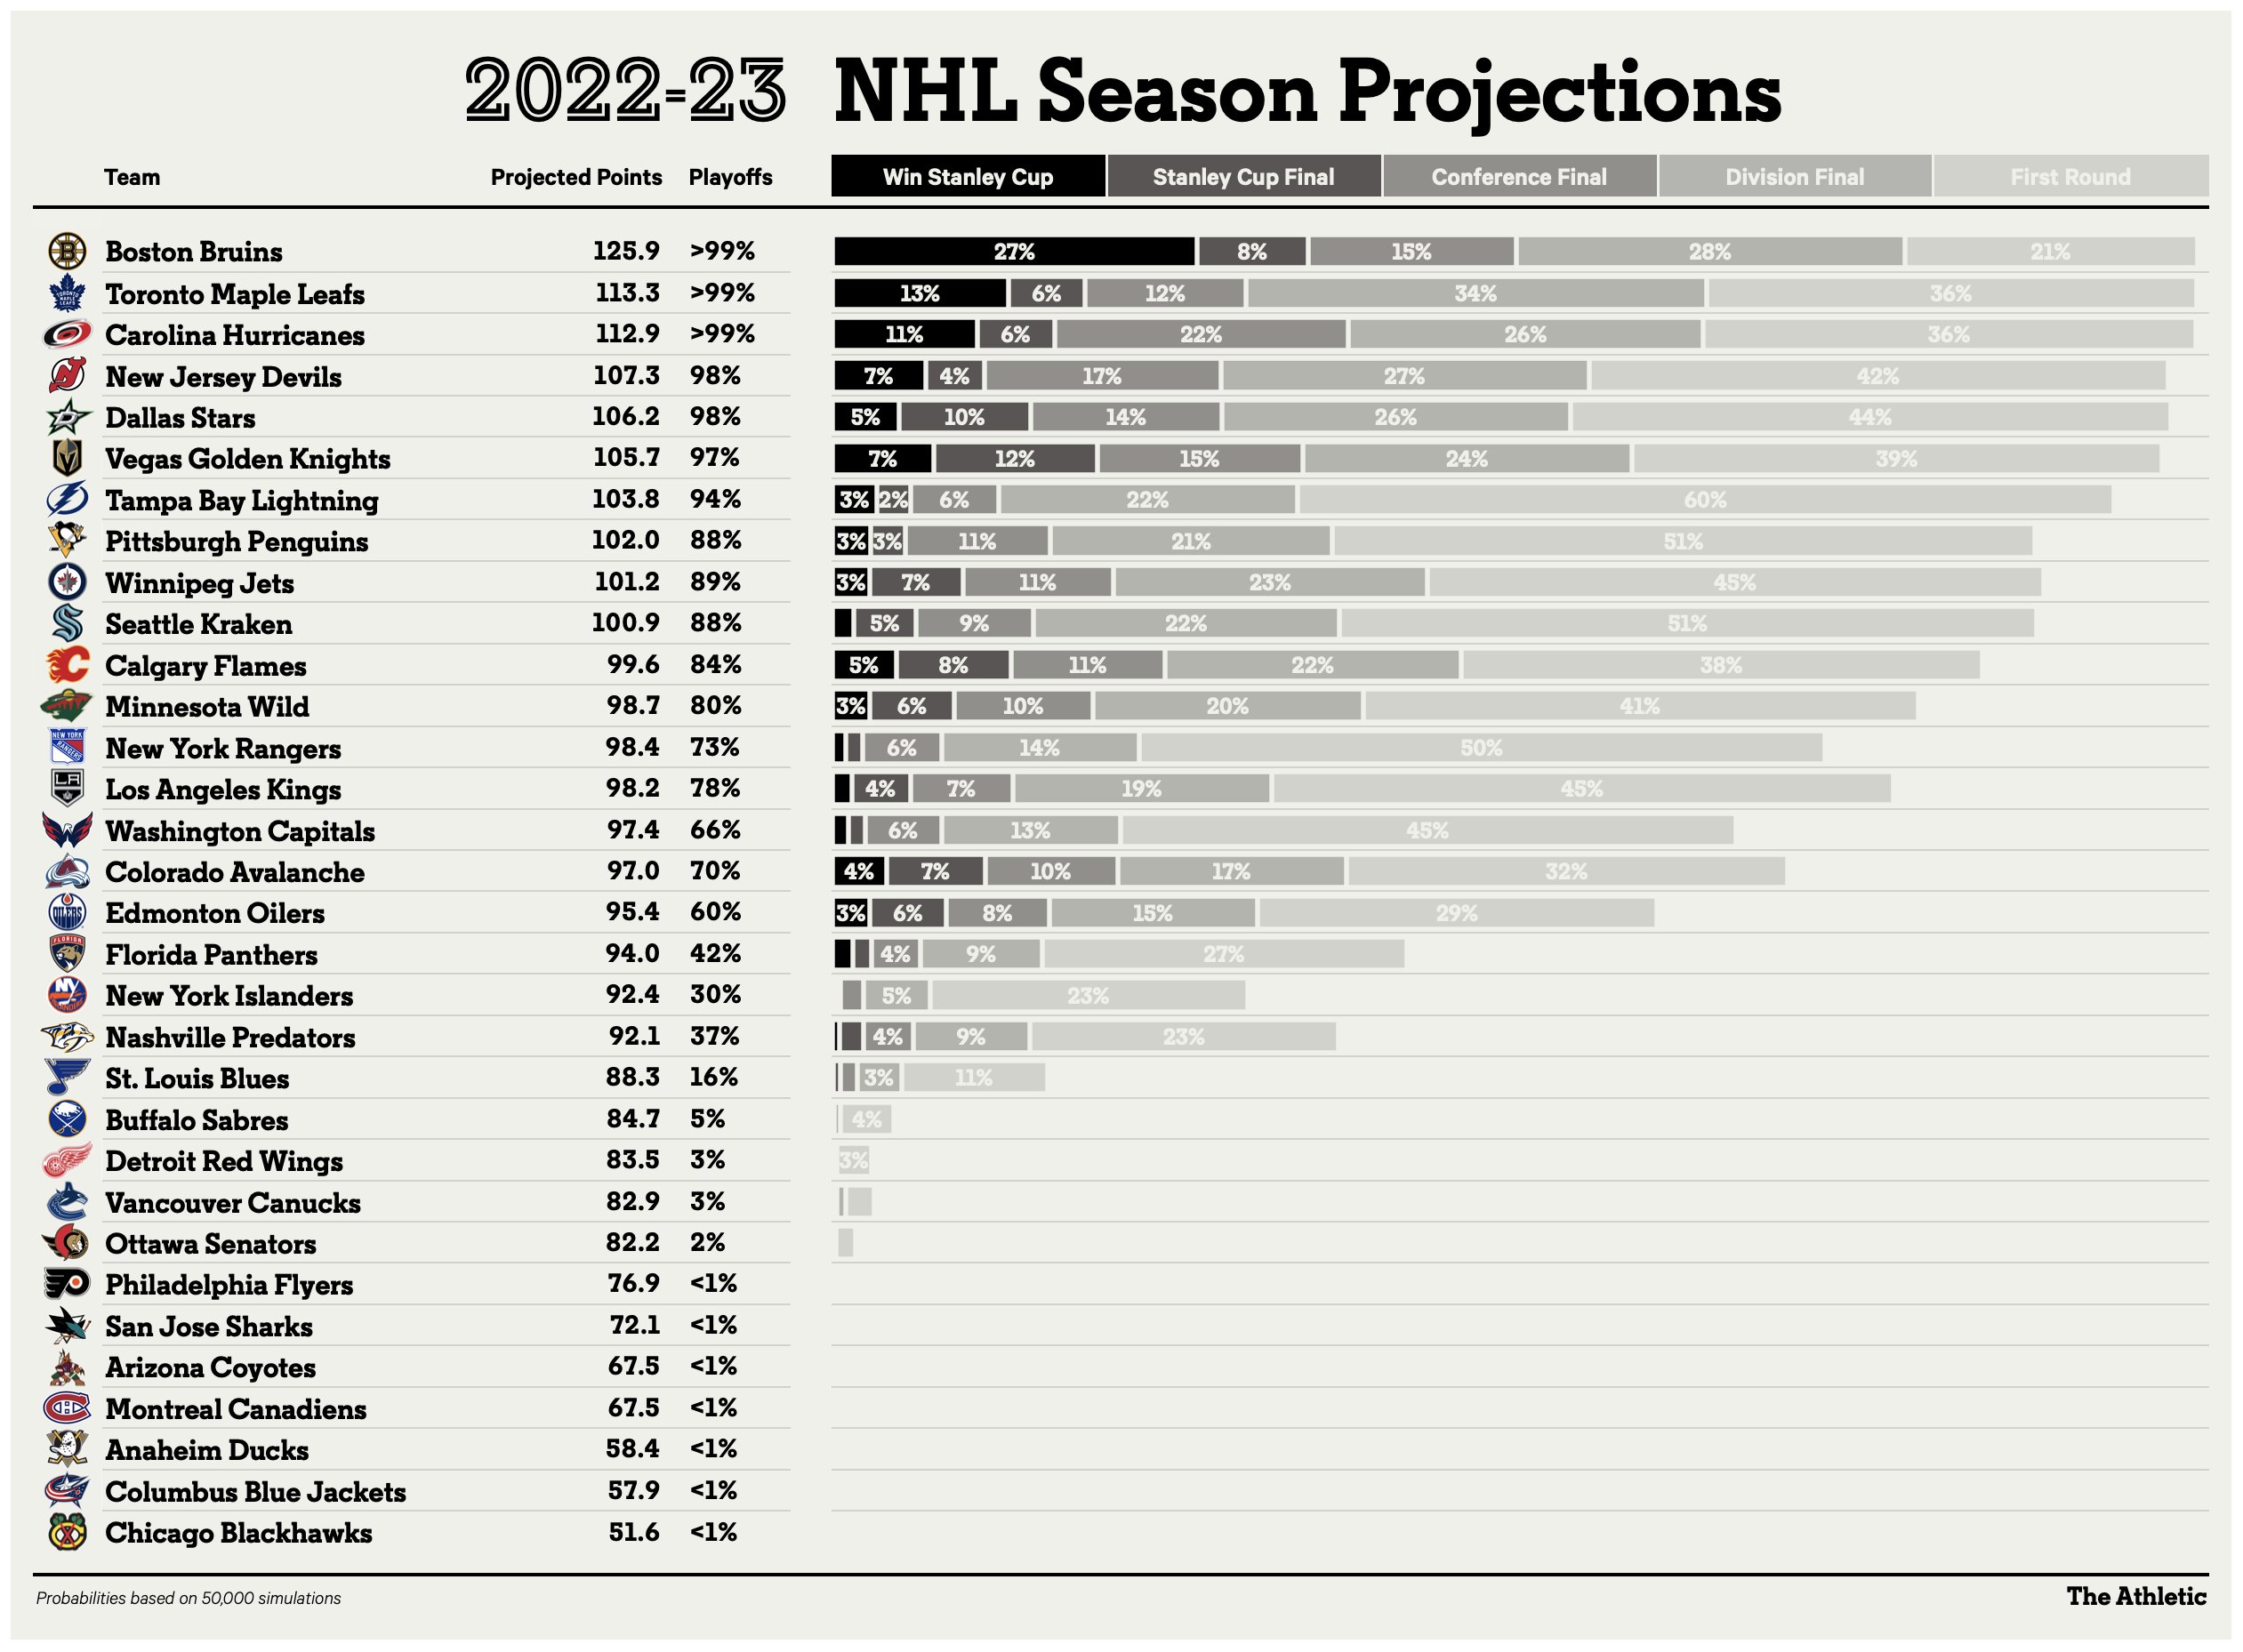 NHL Stanley Cup playoff chances and projected standings - The Athletic